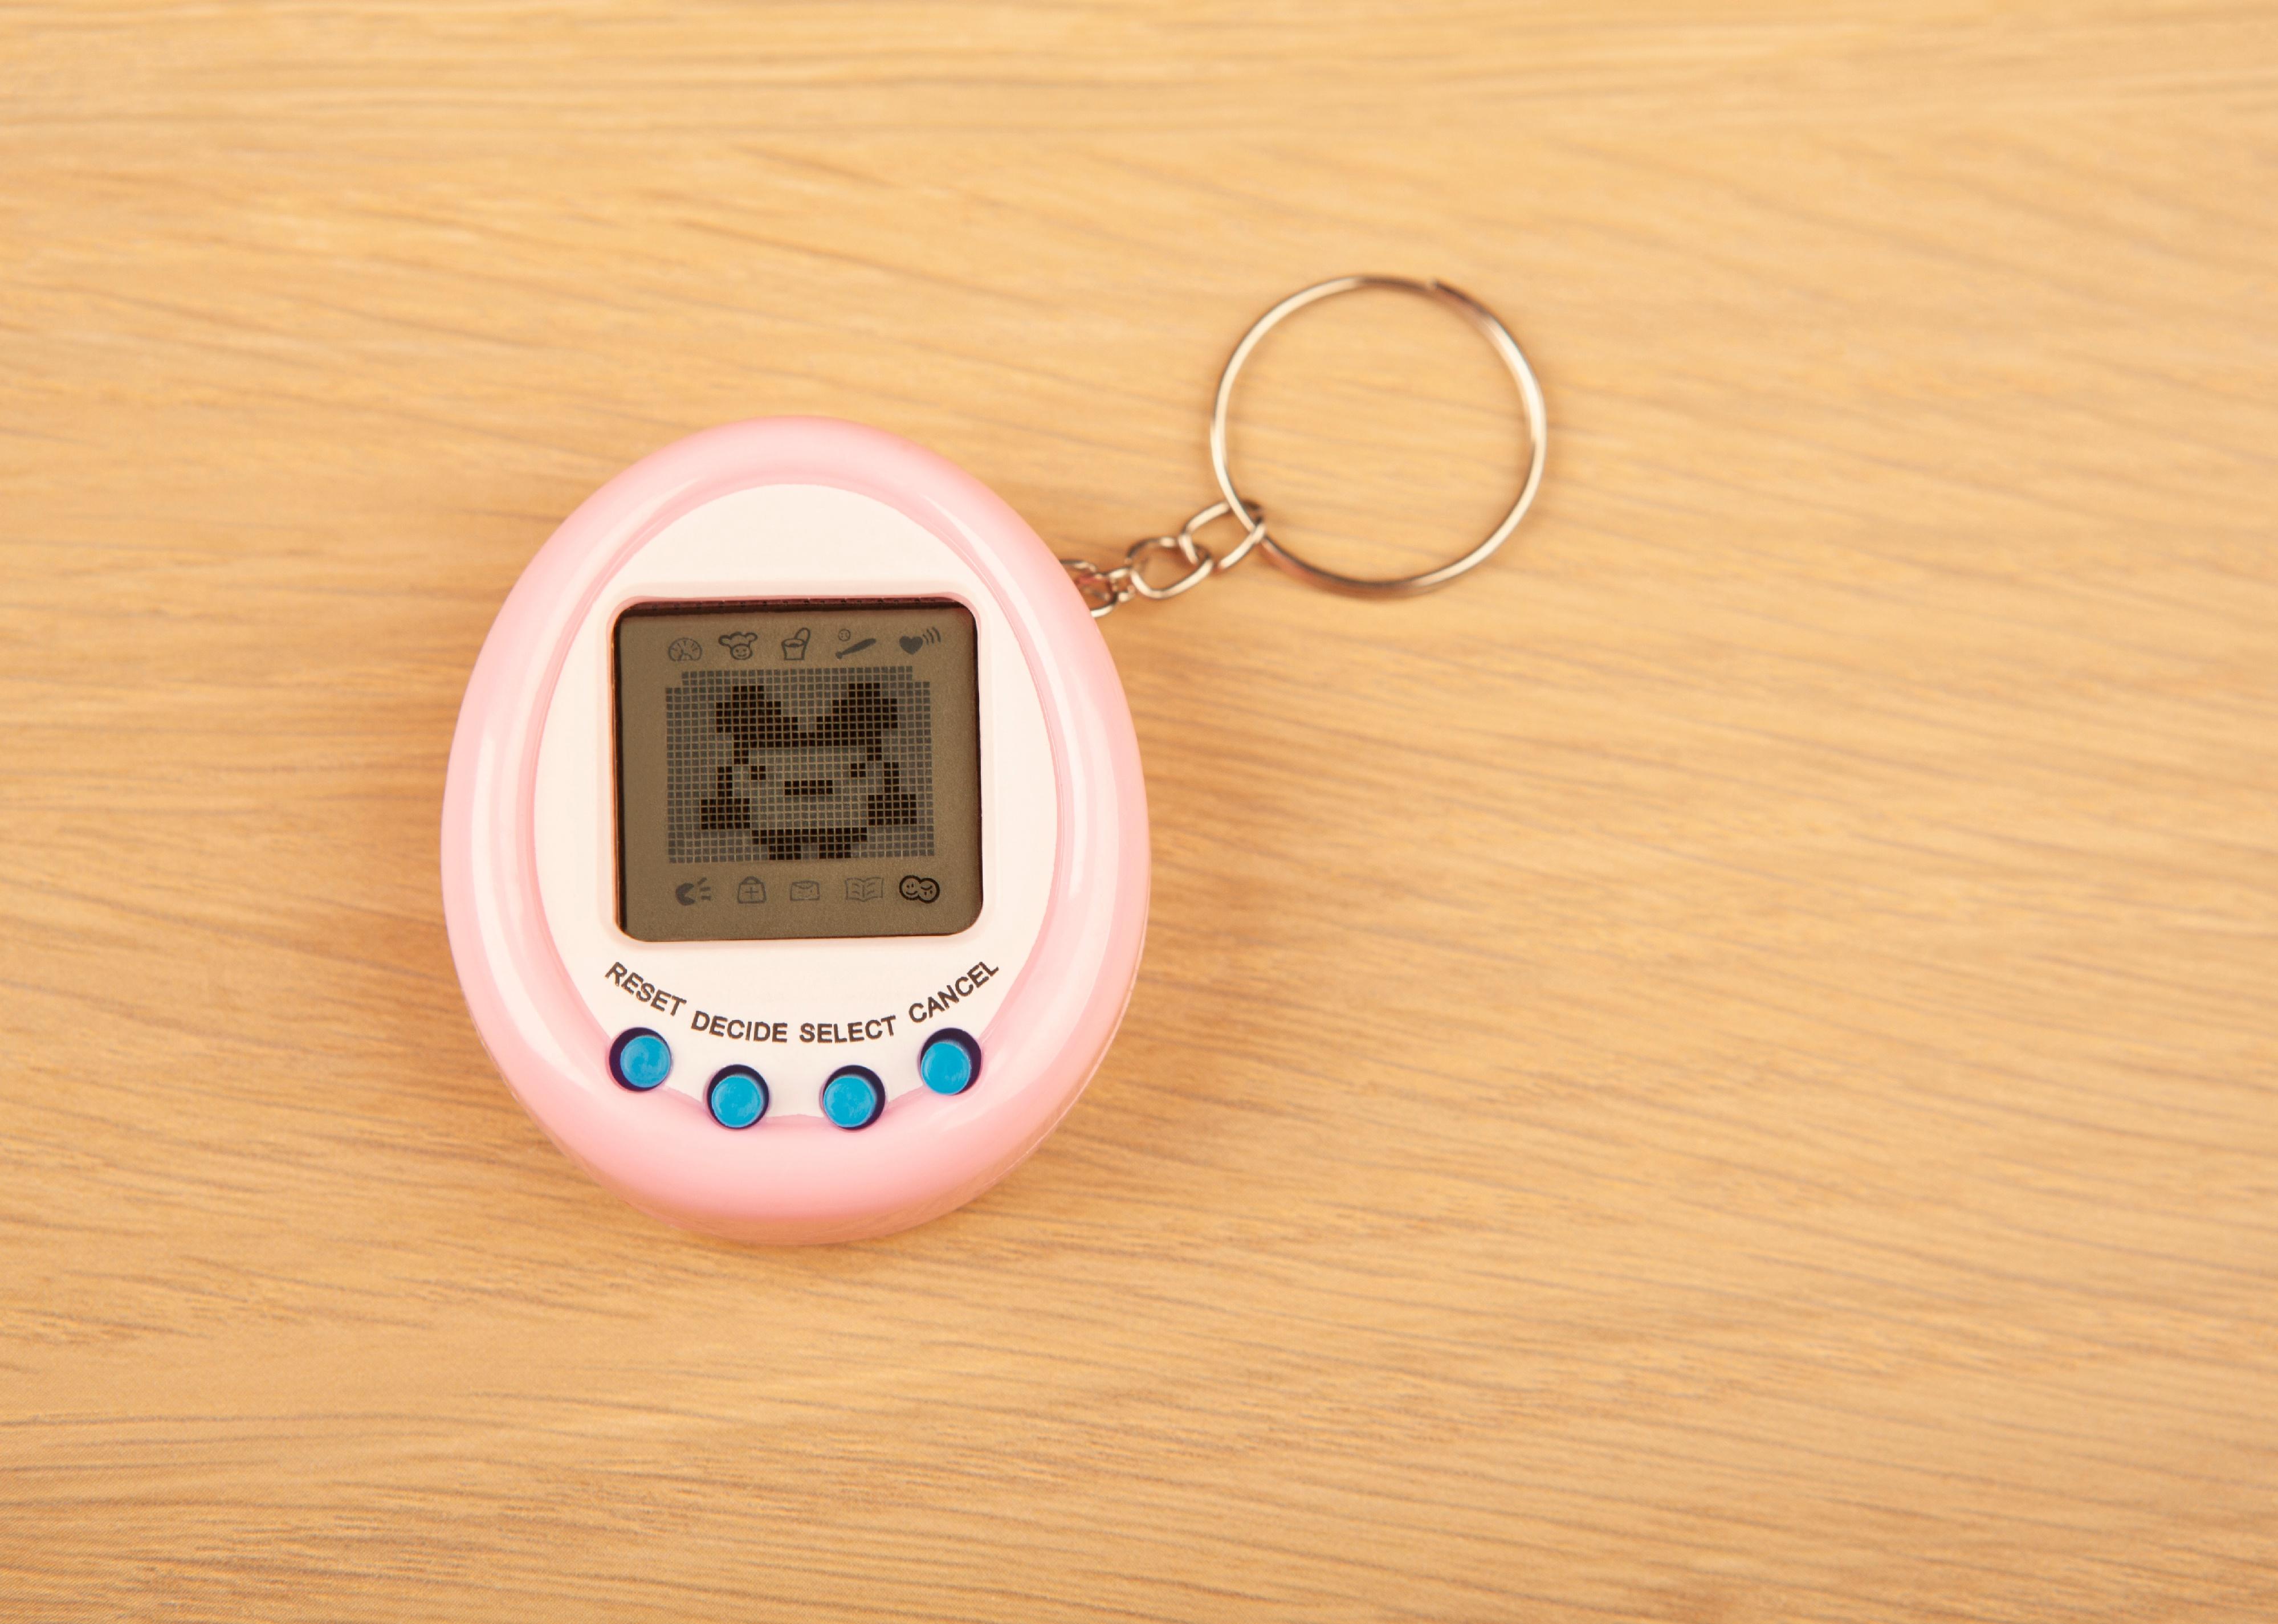 Image of Tamagotchi on wooden table.